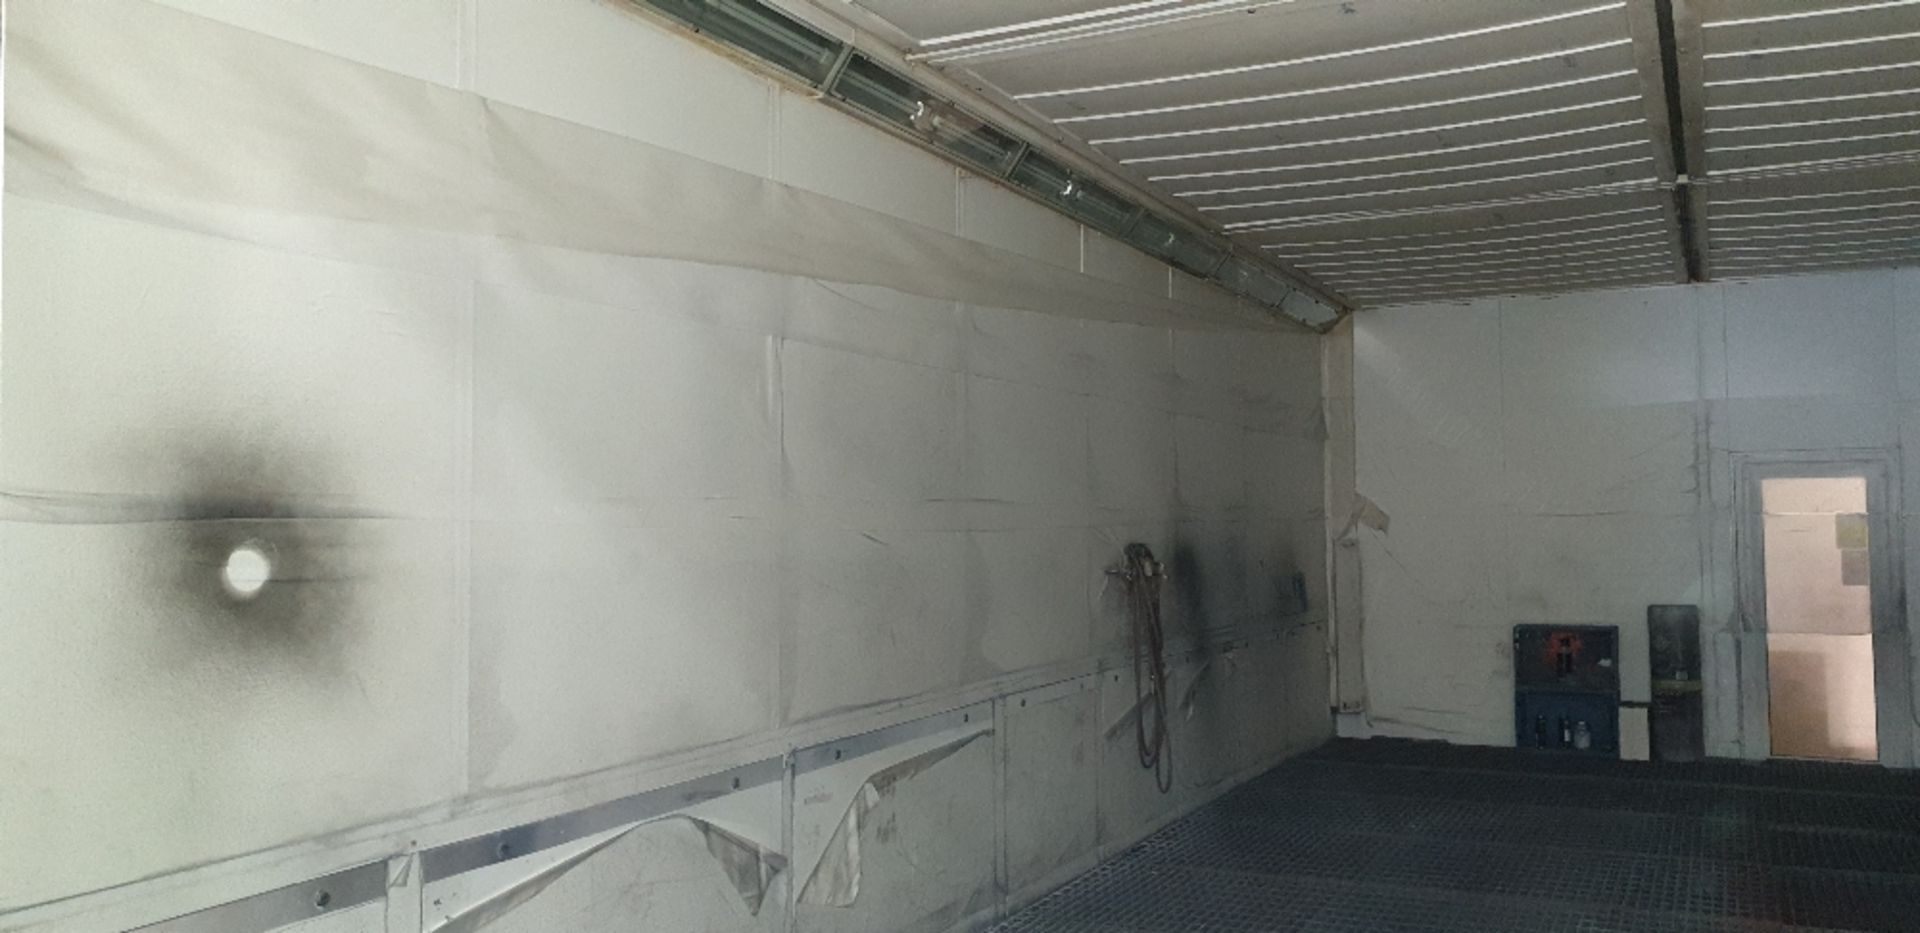 Junair spray bake booth with underfloor and ceiling extraction (internal dimensions 9m x 4.5m x 2. - Image 3 of 8